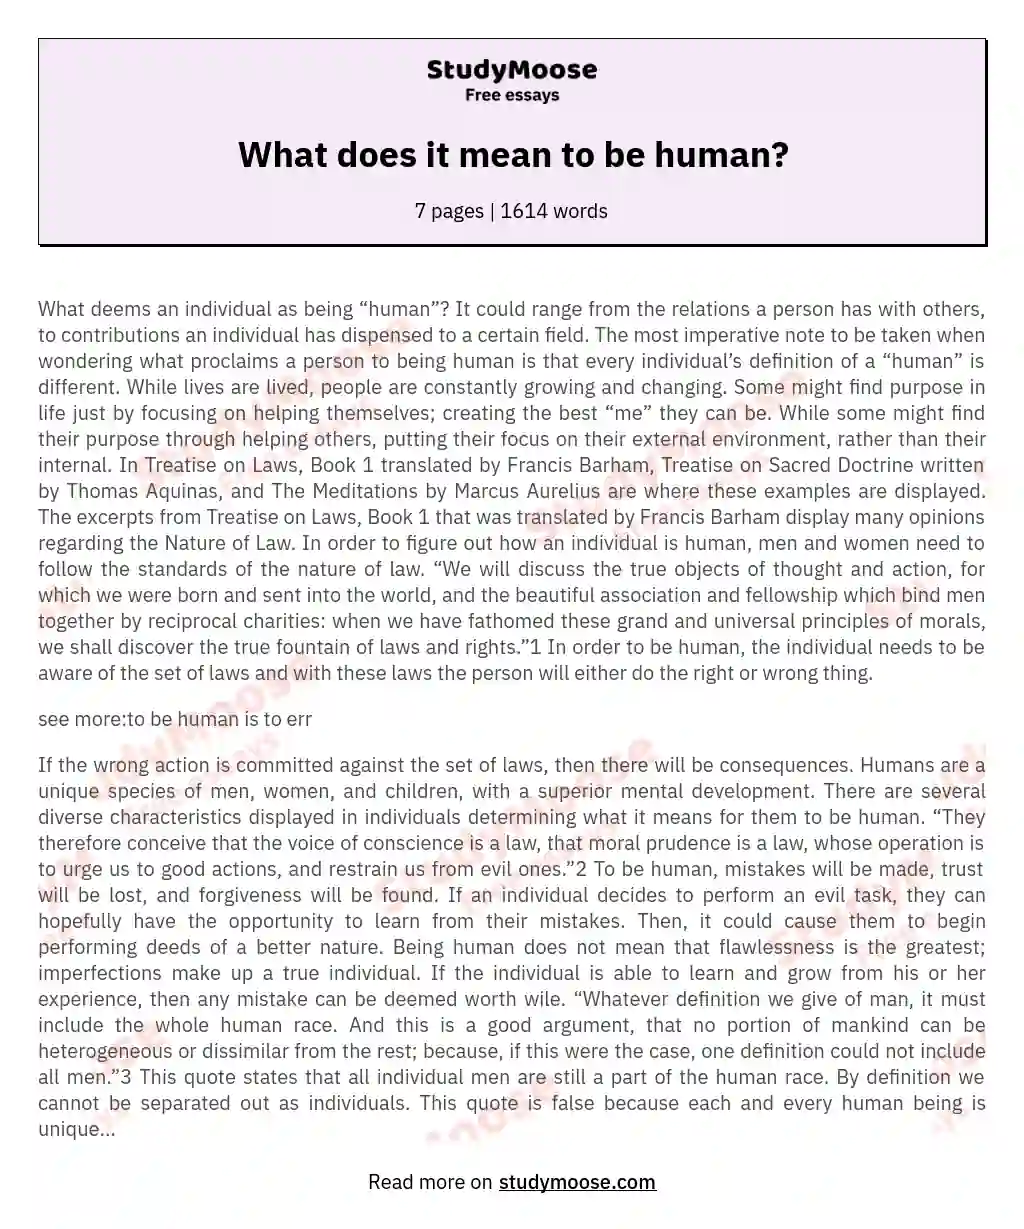 What does it mean to be human? essay